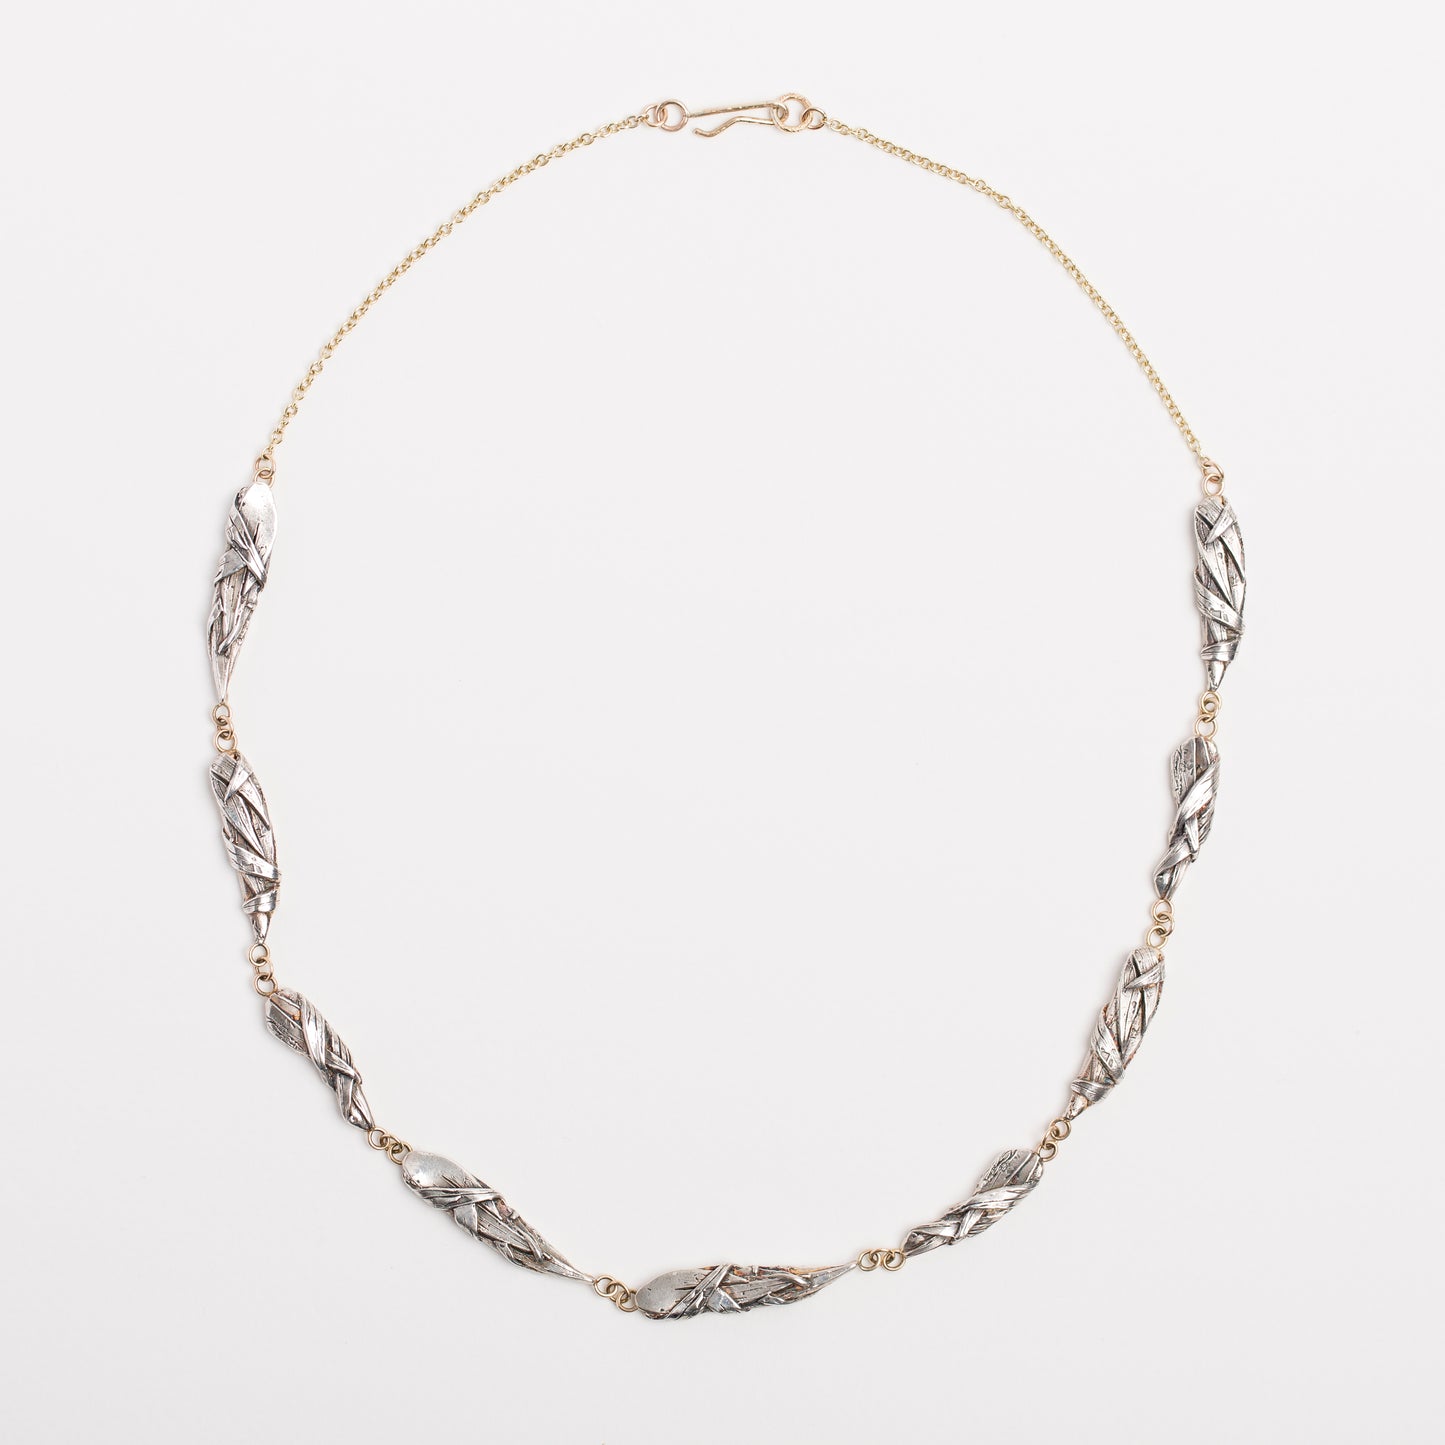 Woven necklace